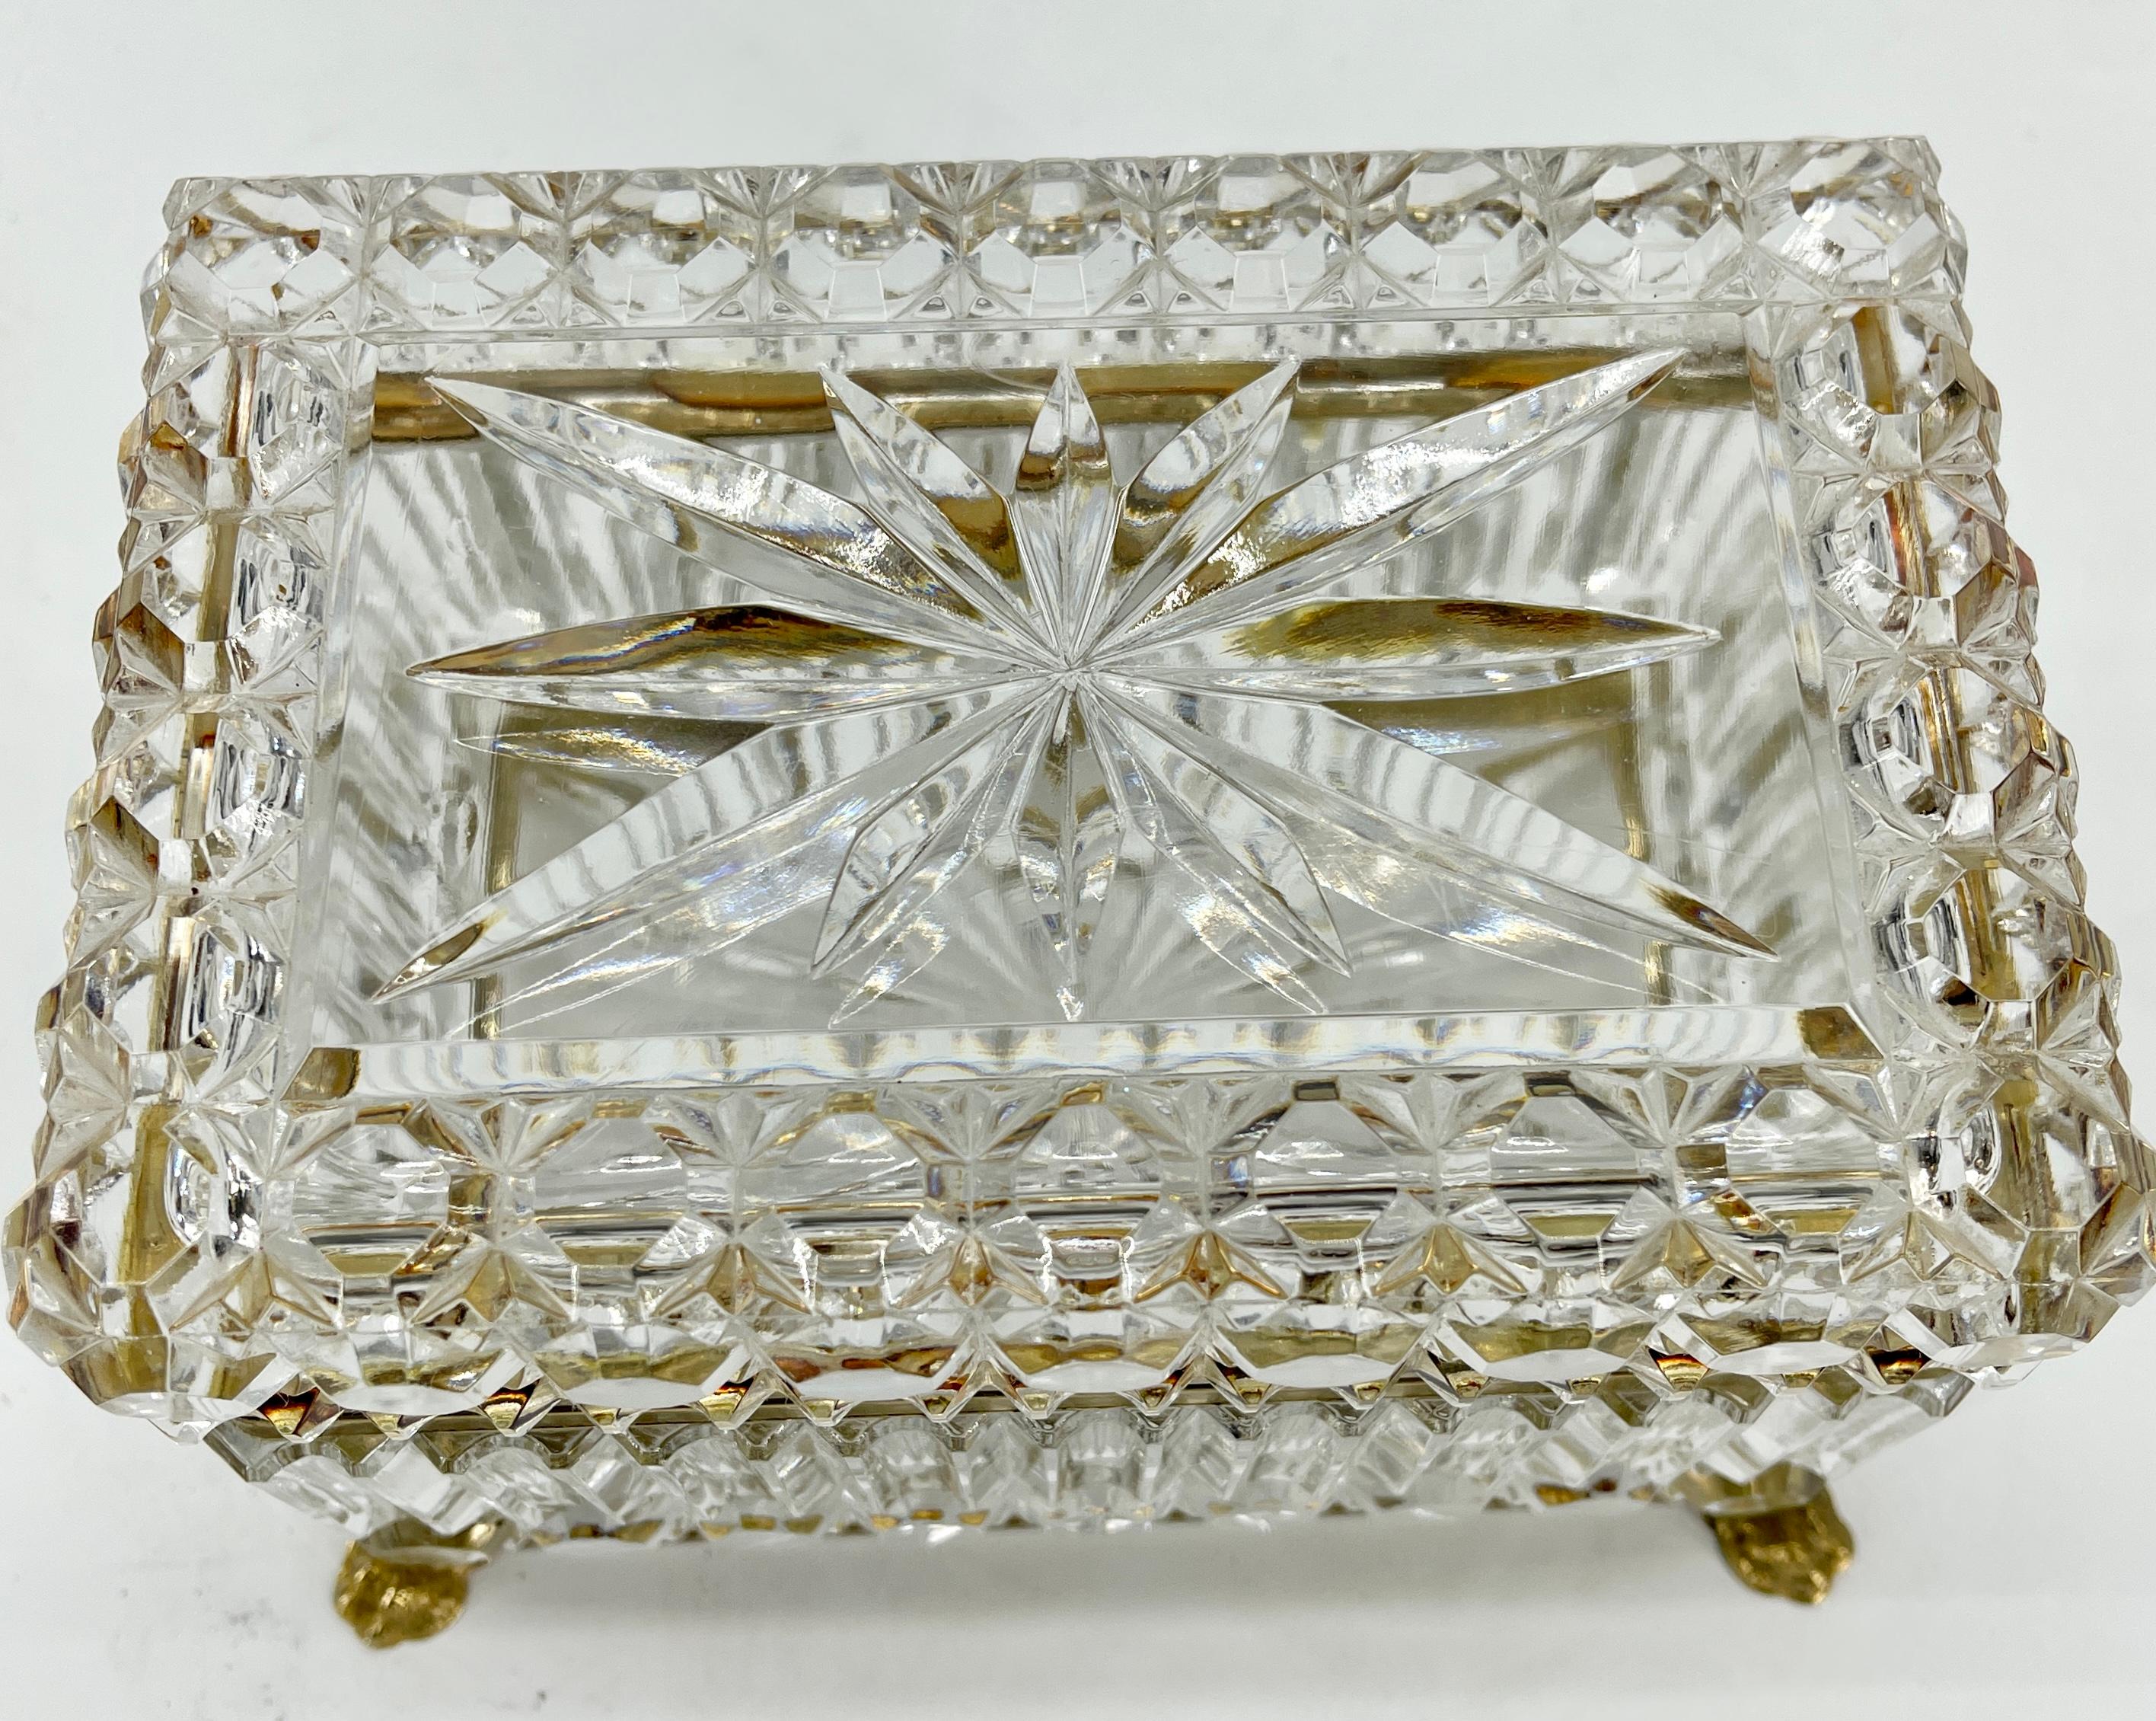 Antique French Cut Crystal and Brass Jewelry Box, Vanity Box or Candy Dish 2